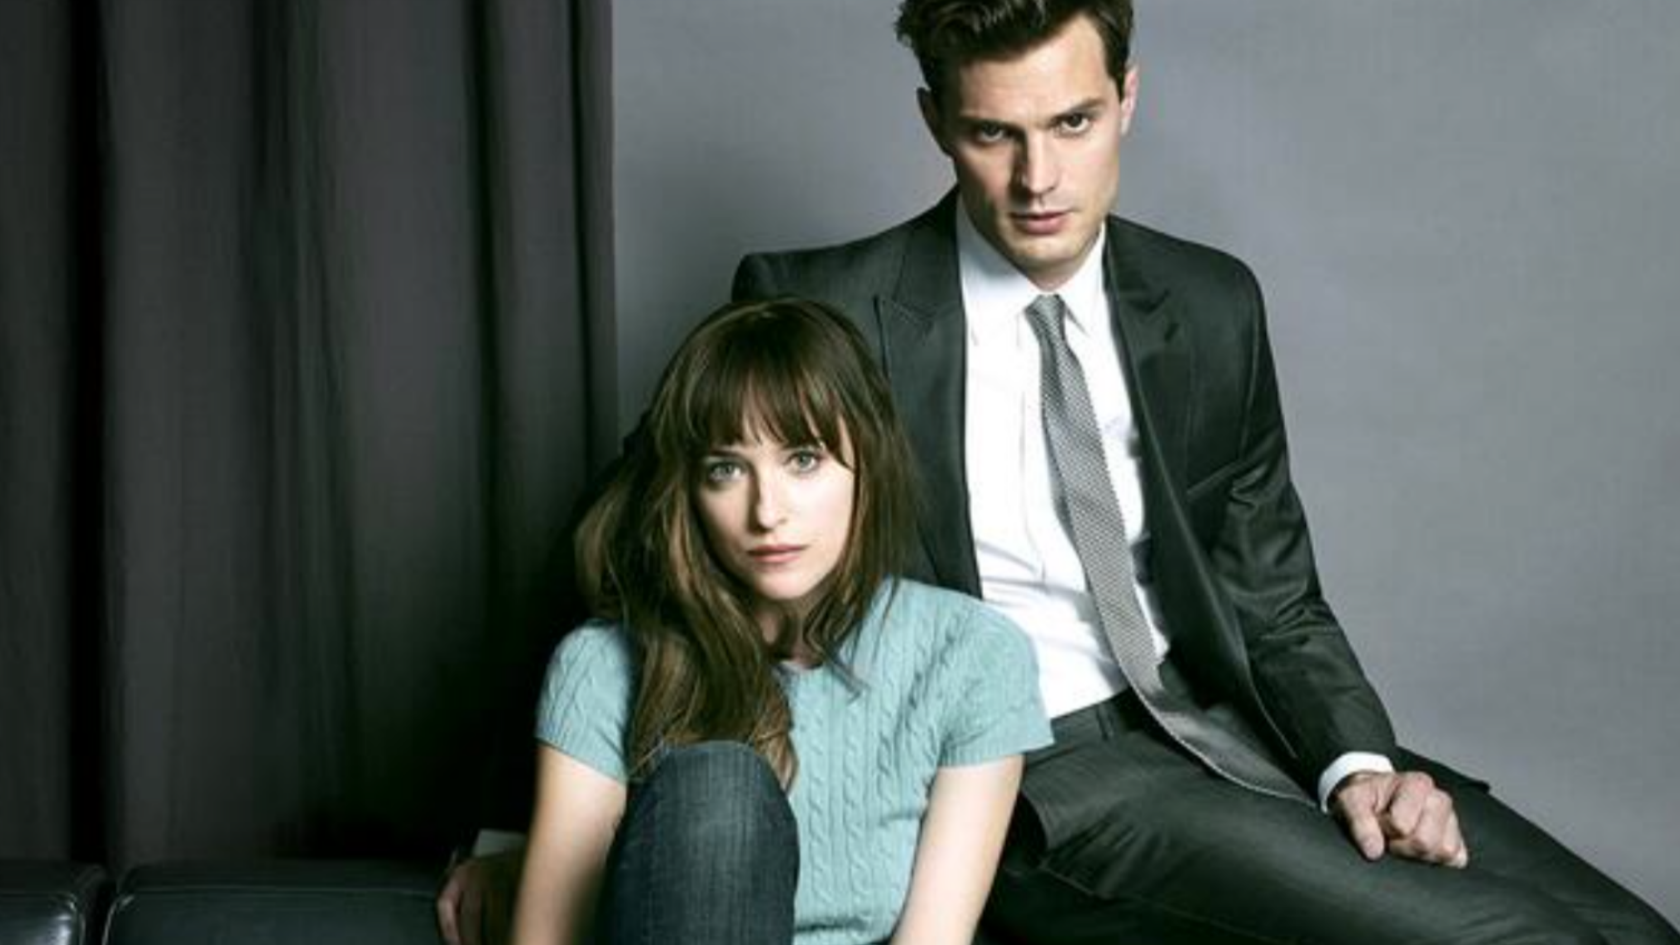 Watch The First Full Scene From The Fifty Shades Of Grey